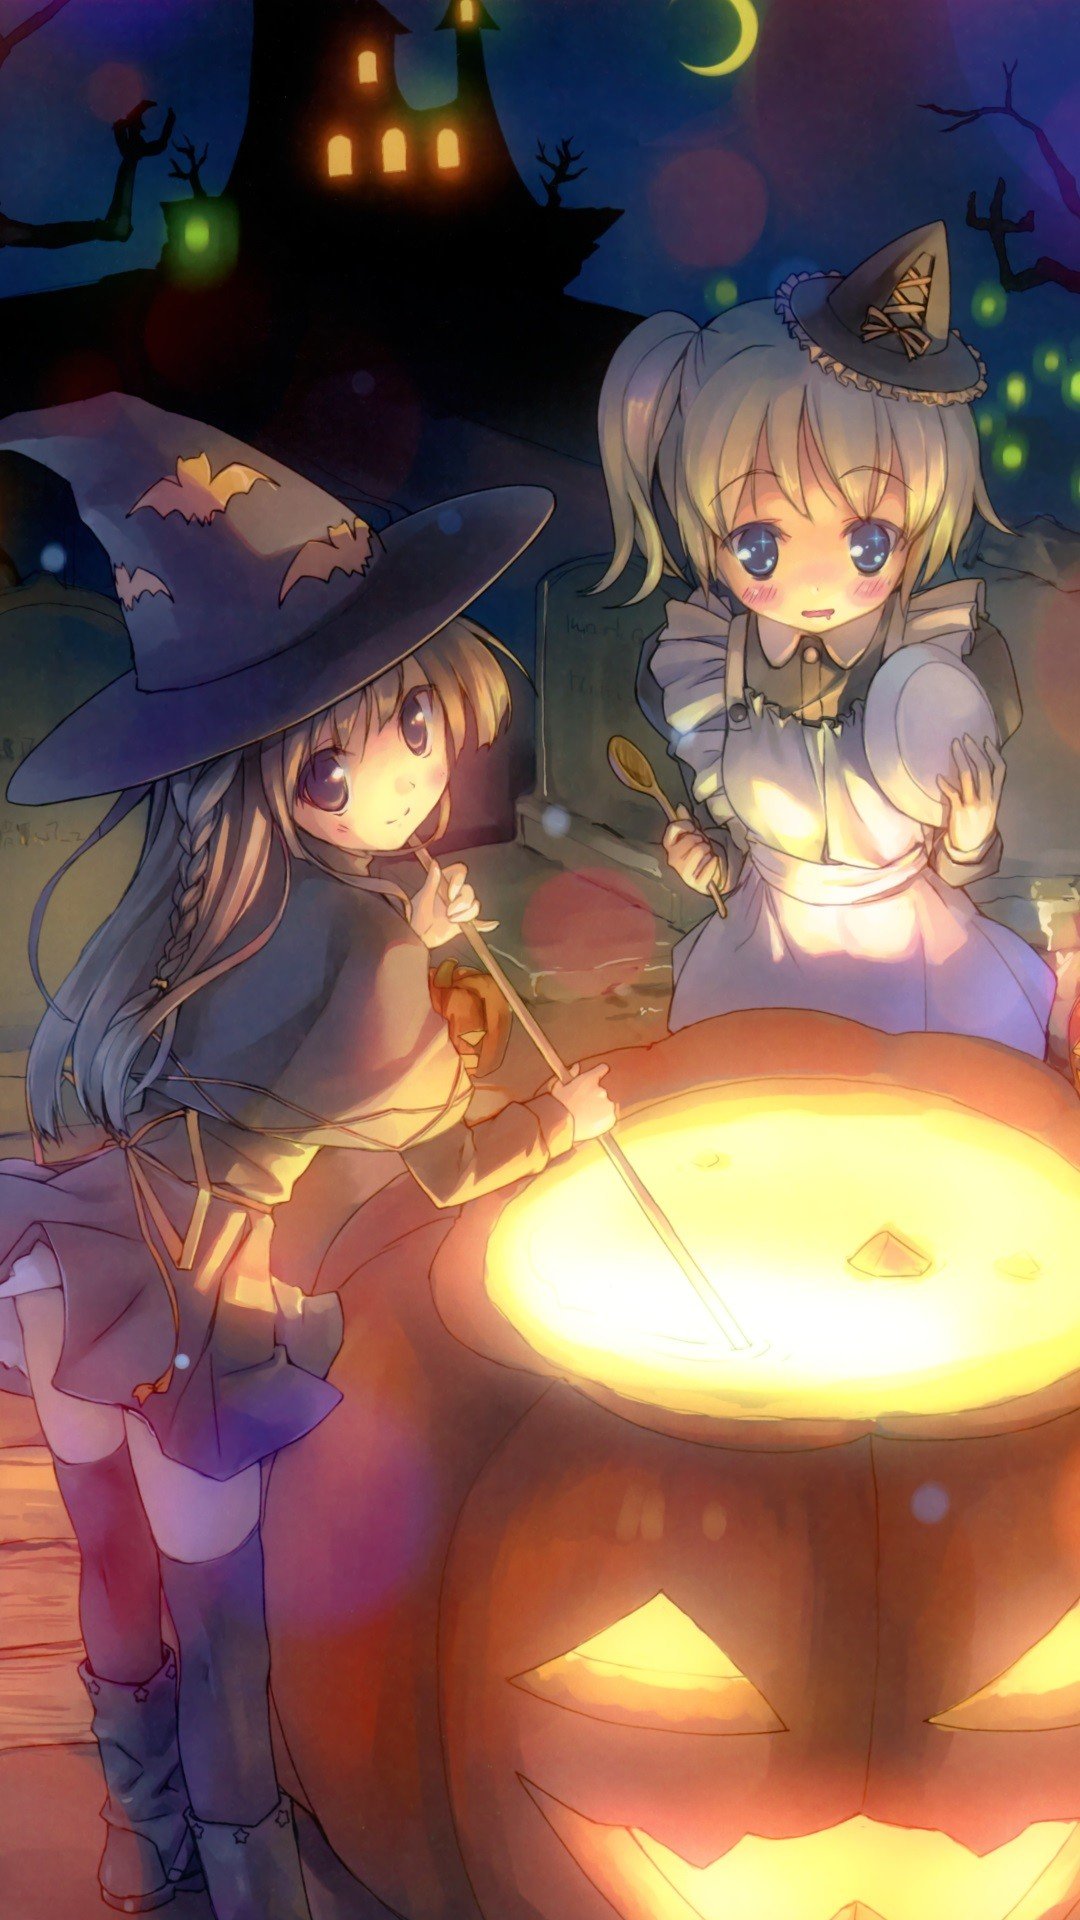 Halloween Anime - HD Wallpaper - APK Download for Android